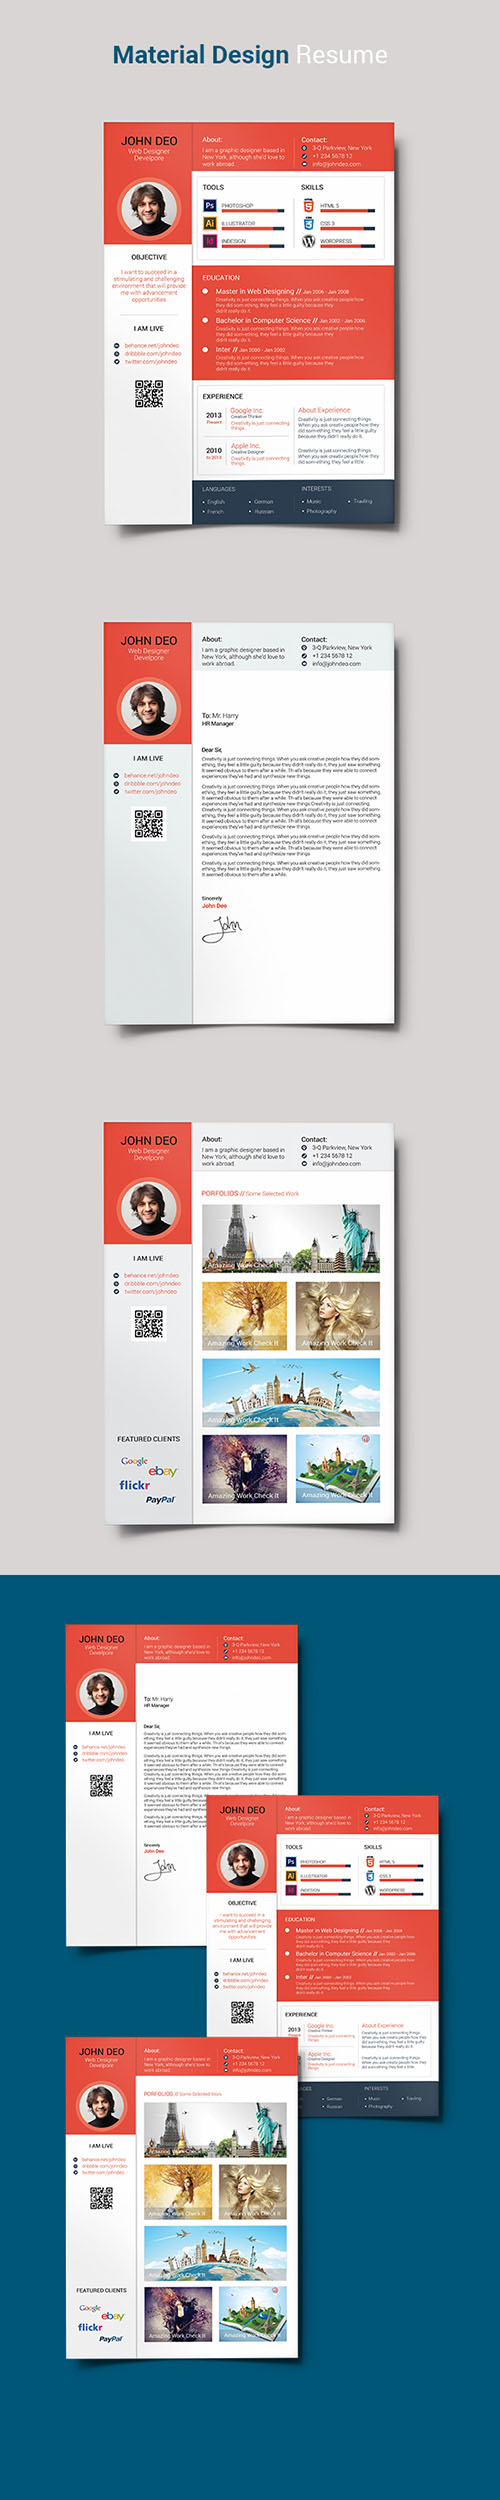 PSD Material Design Resume - Red & White Color Style